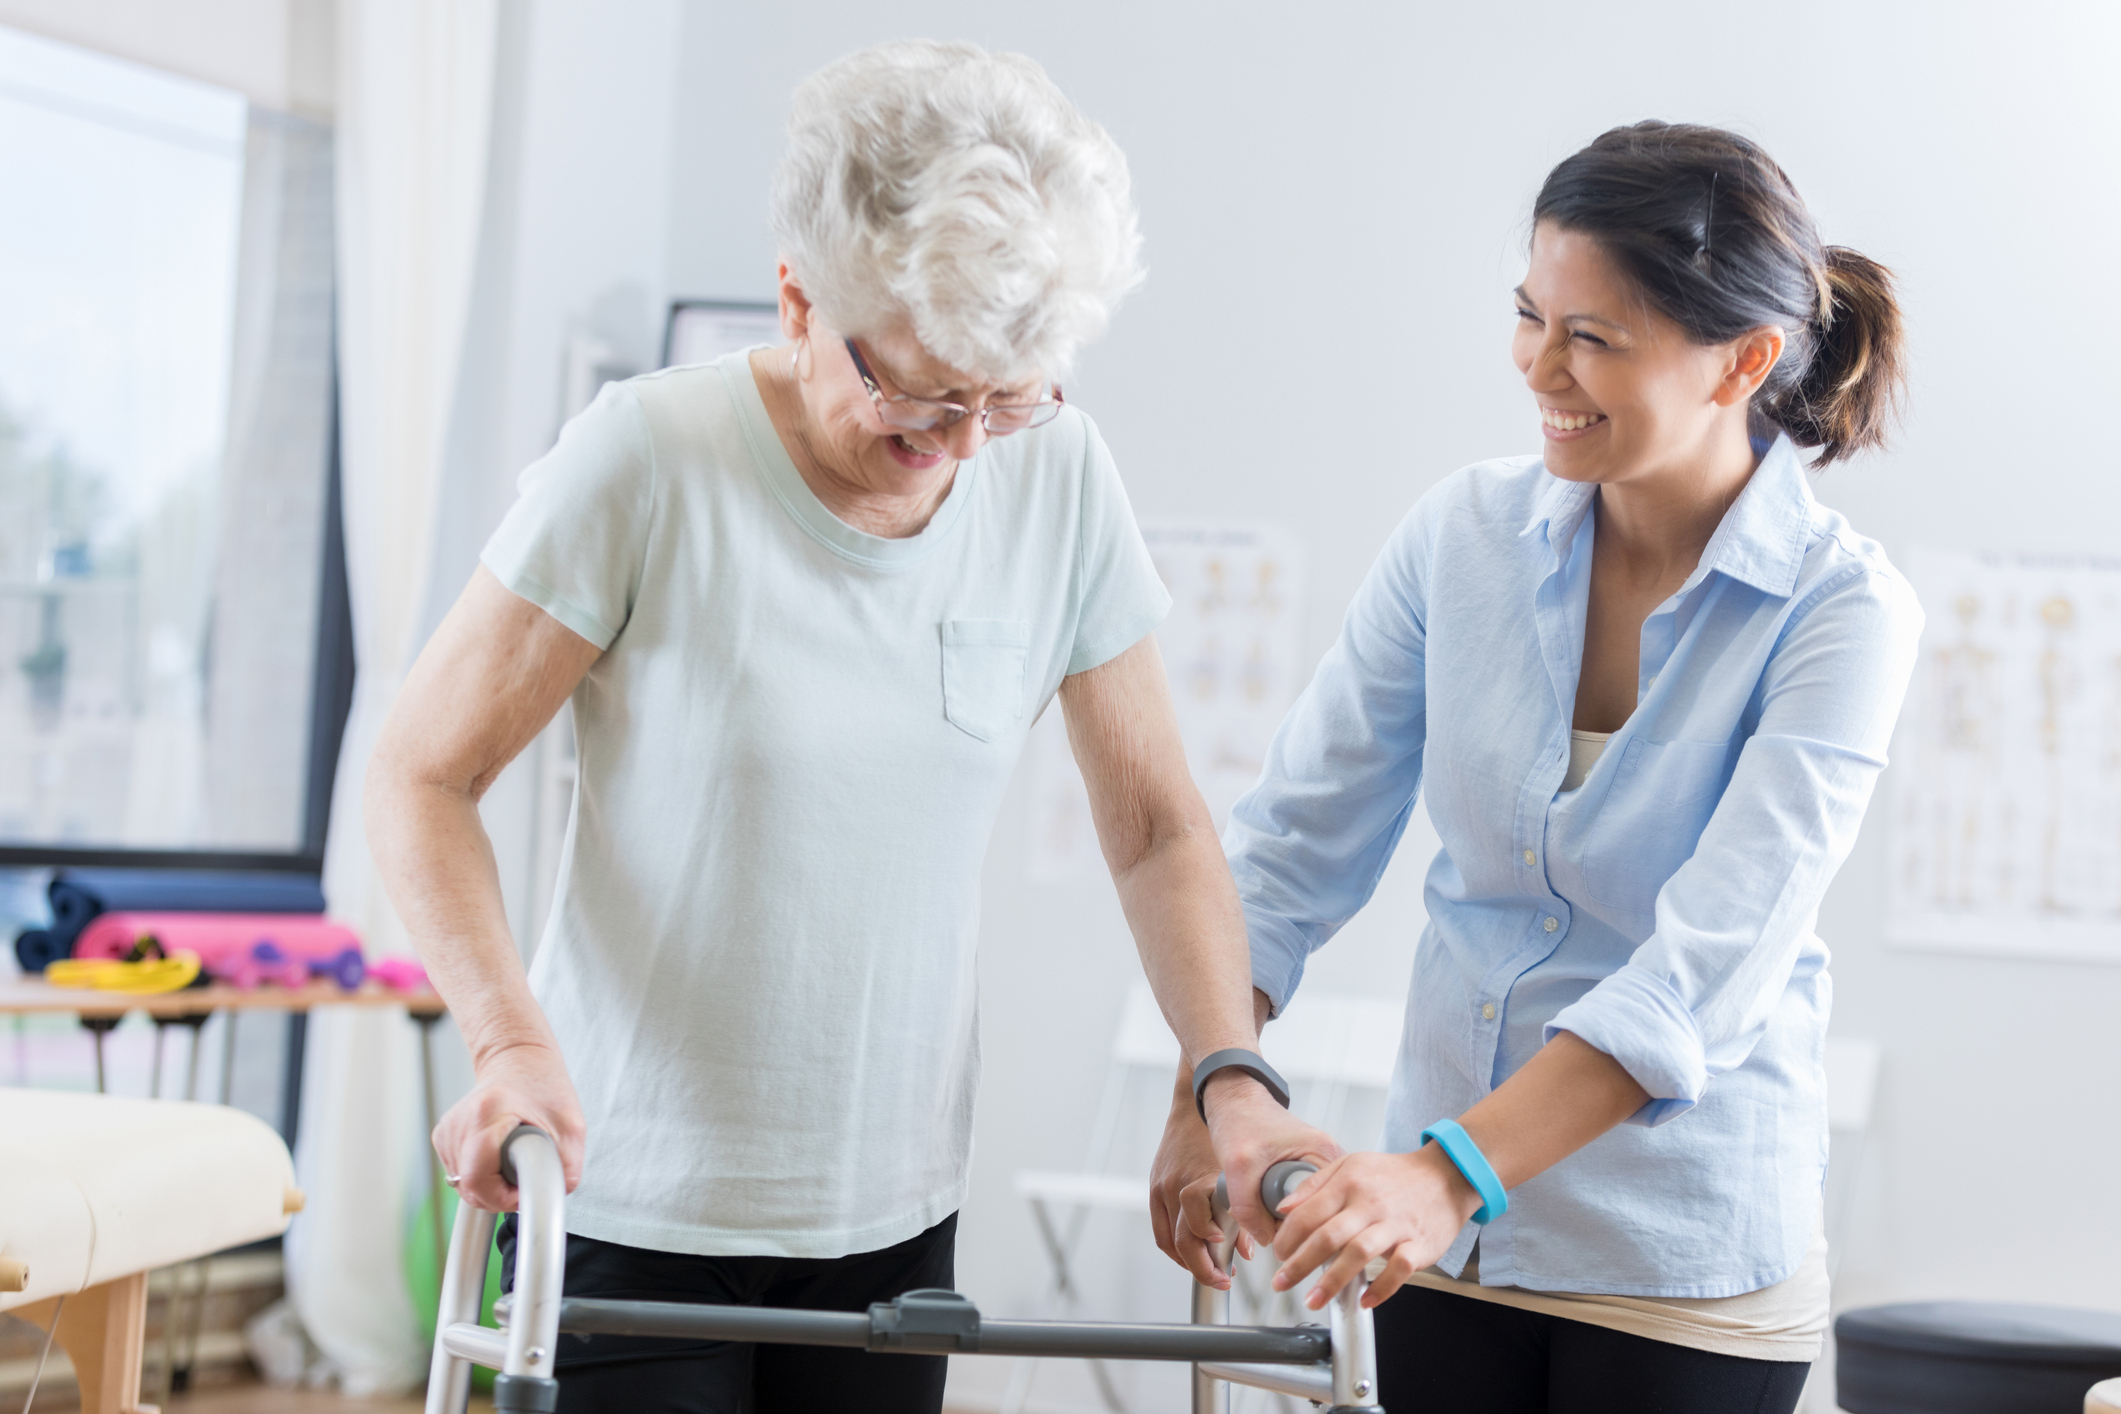 Healthcare professional helps senior woman walk with a walker